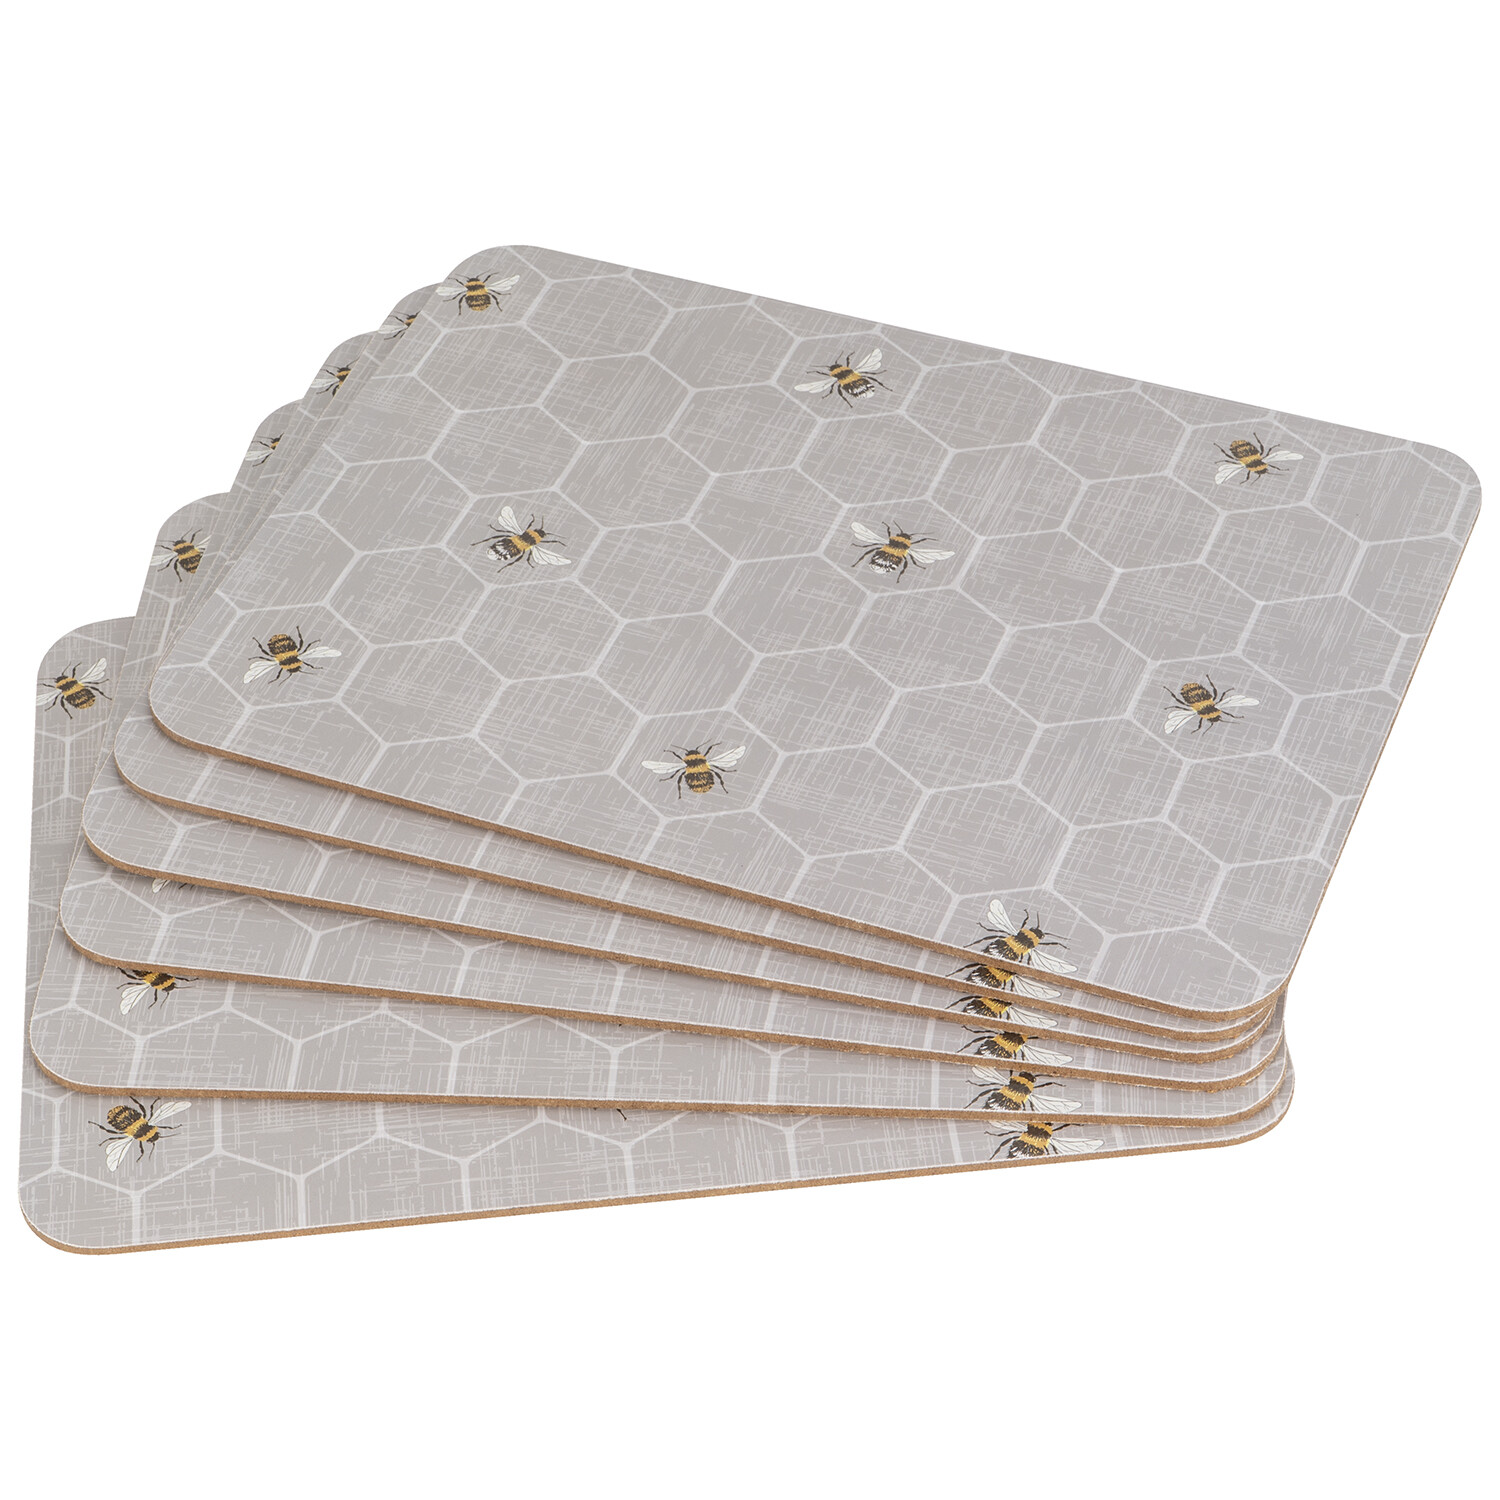 Honey Bee Placemats 6 Pack Image 2